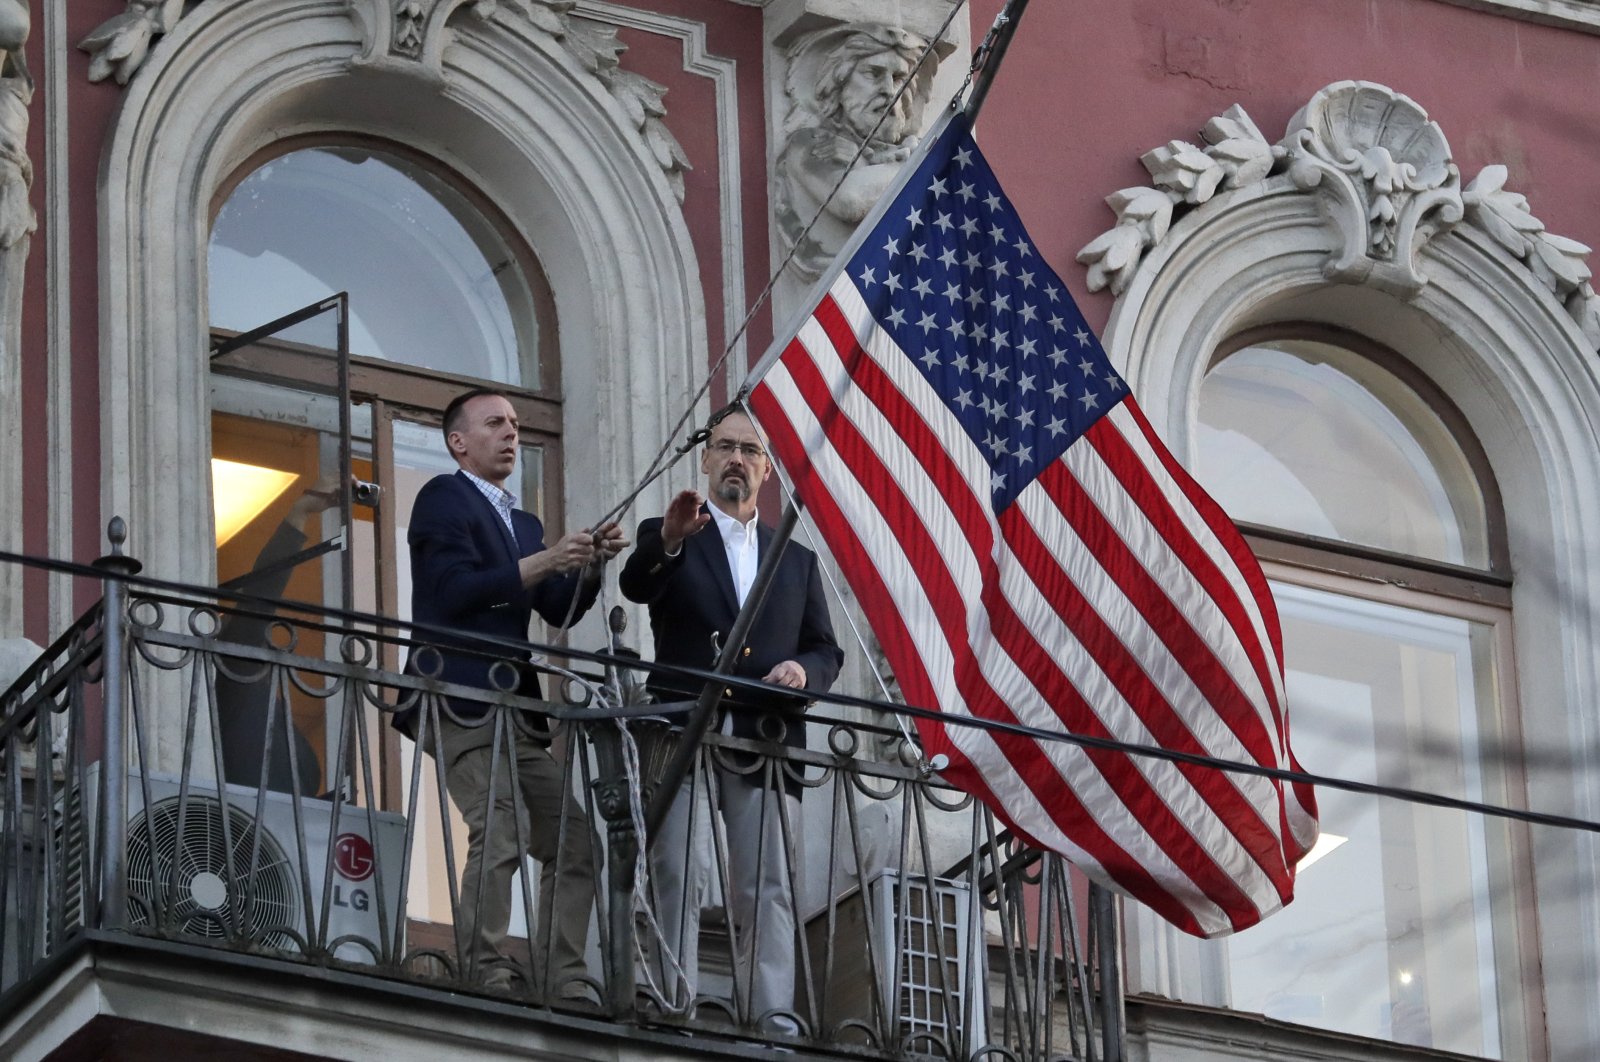 Consulate employees remove the U.S flag at the U.S. consulate in St. Petersburg, Russia, March 31, 2018. (AP Photo)